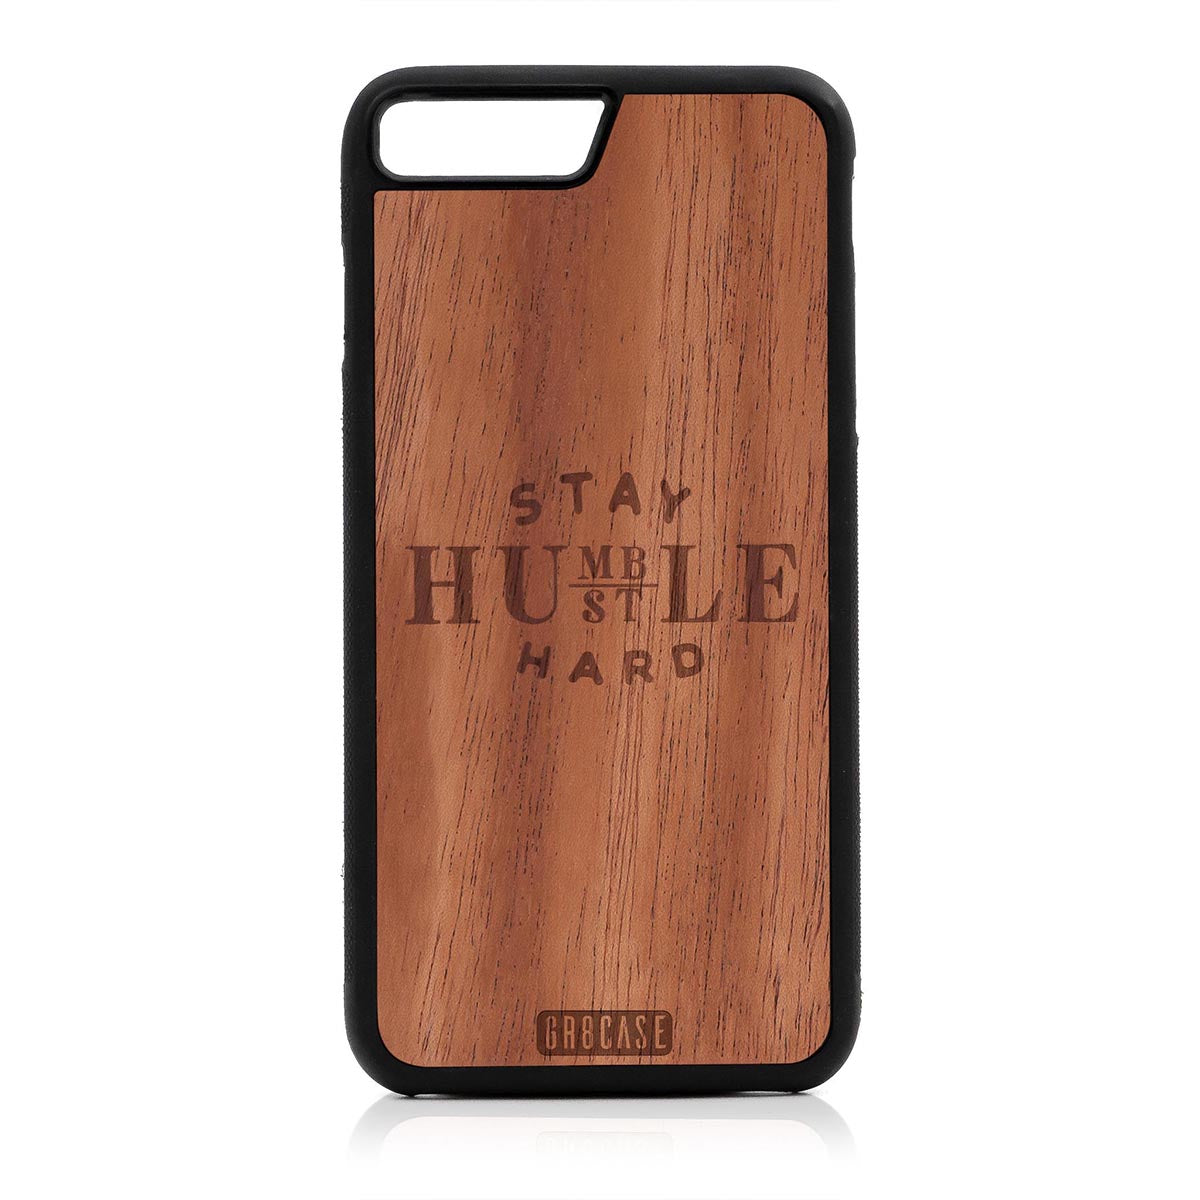 Stay Humble Hustle Hard Design Wood Case For iPhone 7 Plus / 8 Plus by GR8CASE